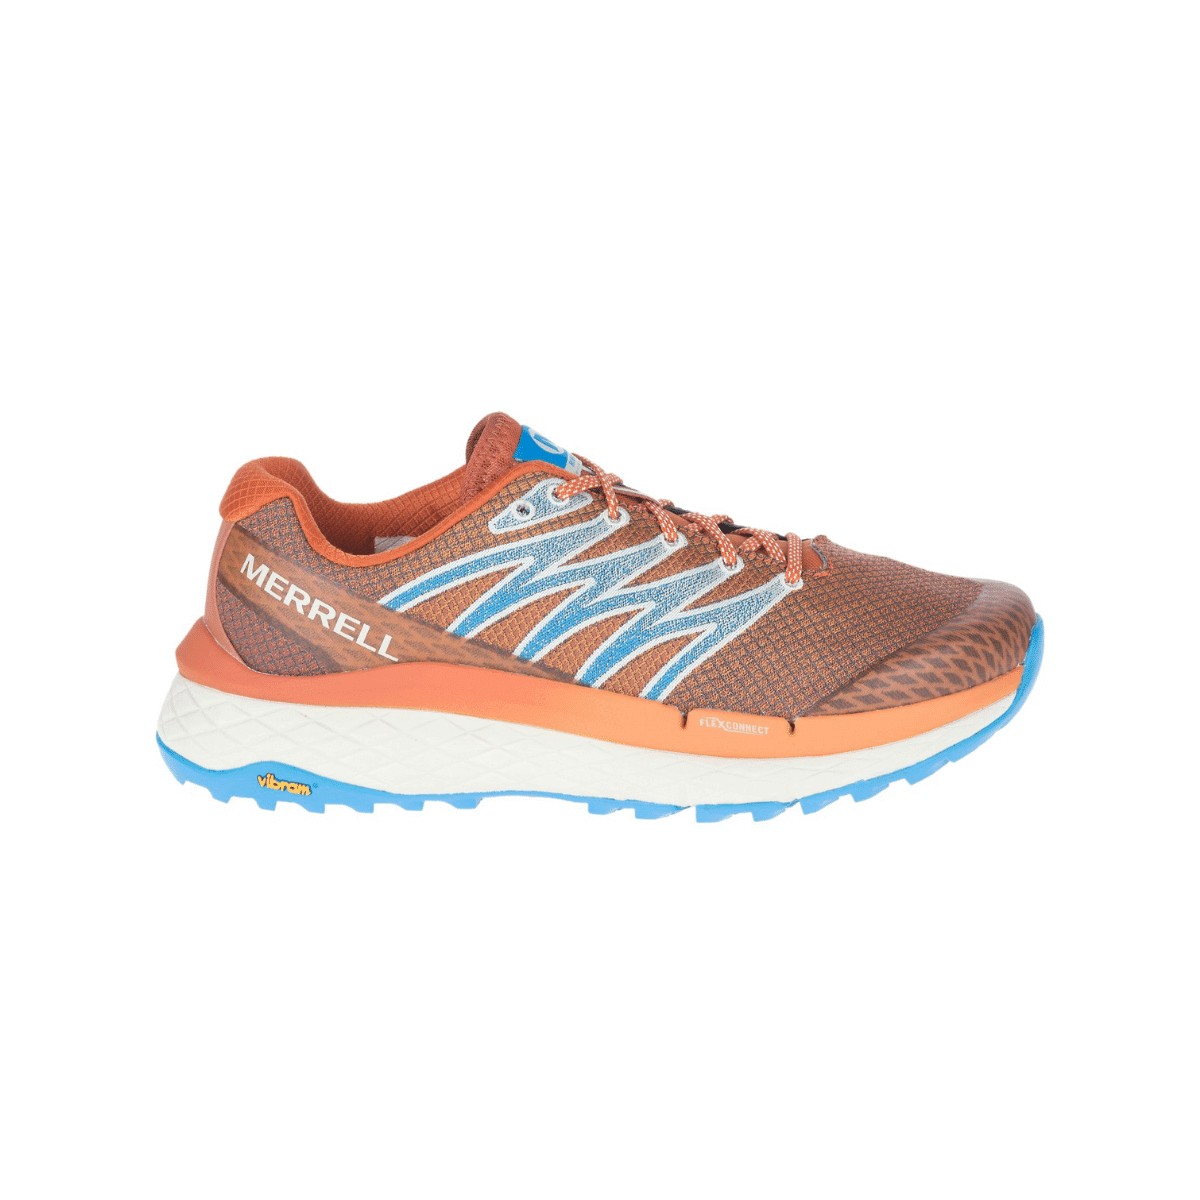 Chaussures Merrell Rubato Solar Rouge AW21, Taille 41,5 - EUR